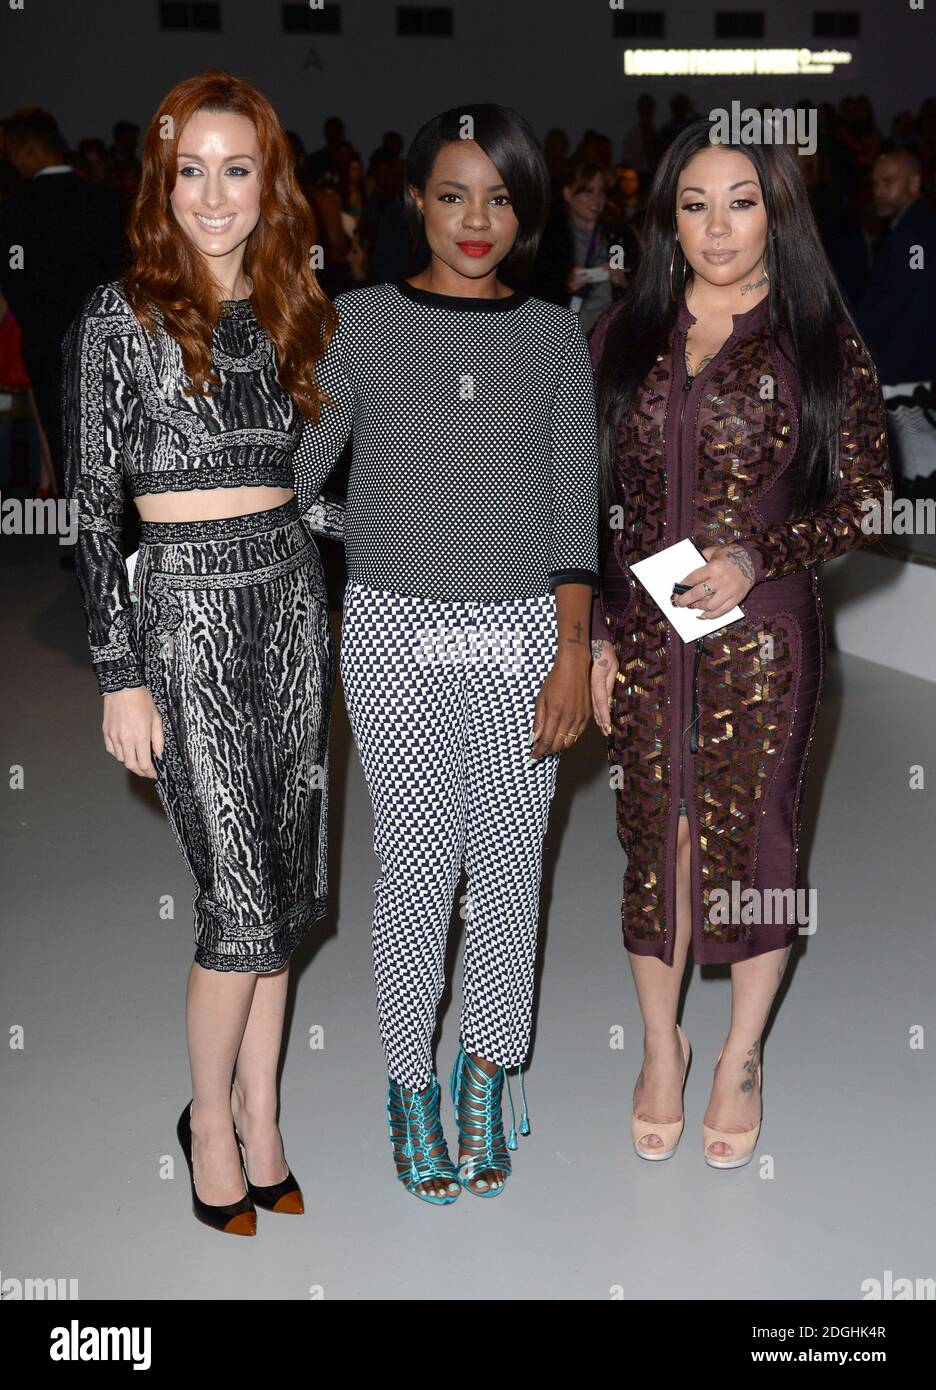 (Left to Right) Siobhan Donaghy, Mutya Buena and Keisha Buchanan of The Sugababes at the PPQ Catwalk Show, part of London Fashion Week, spring Summer 2014, BFC Showspace, Somerset House.   Stock Photo